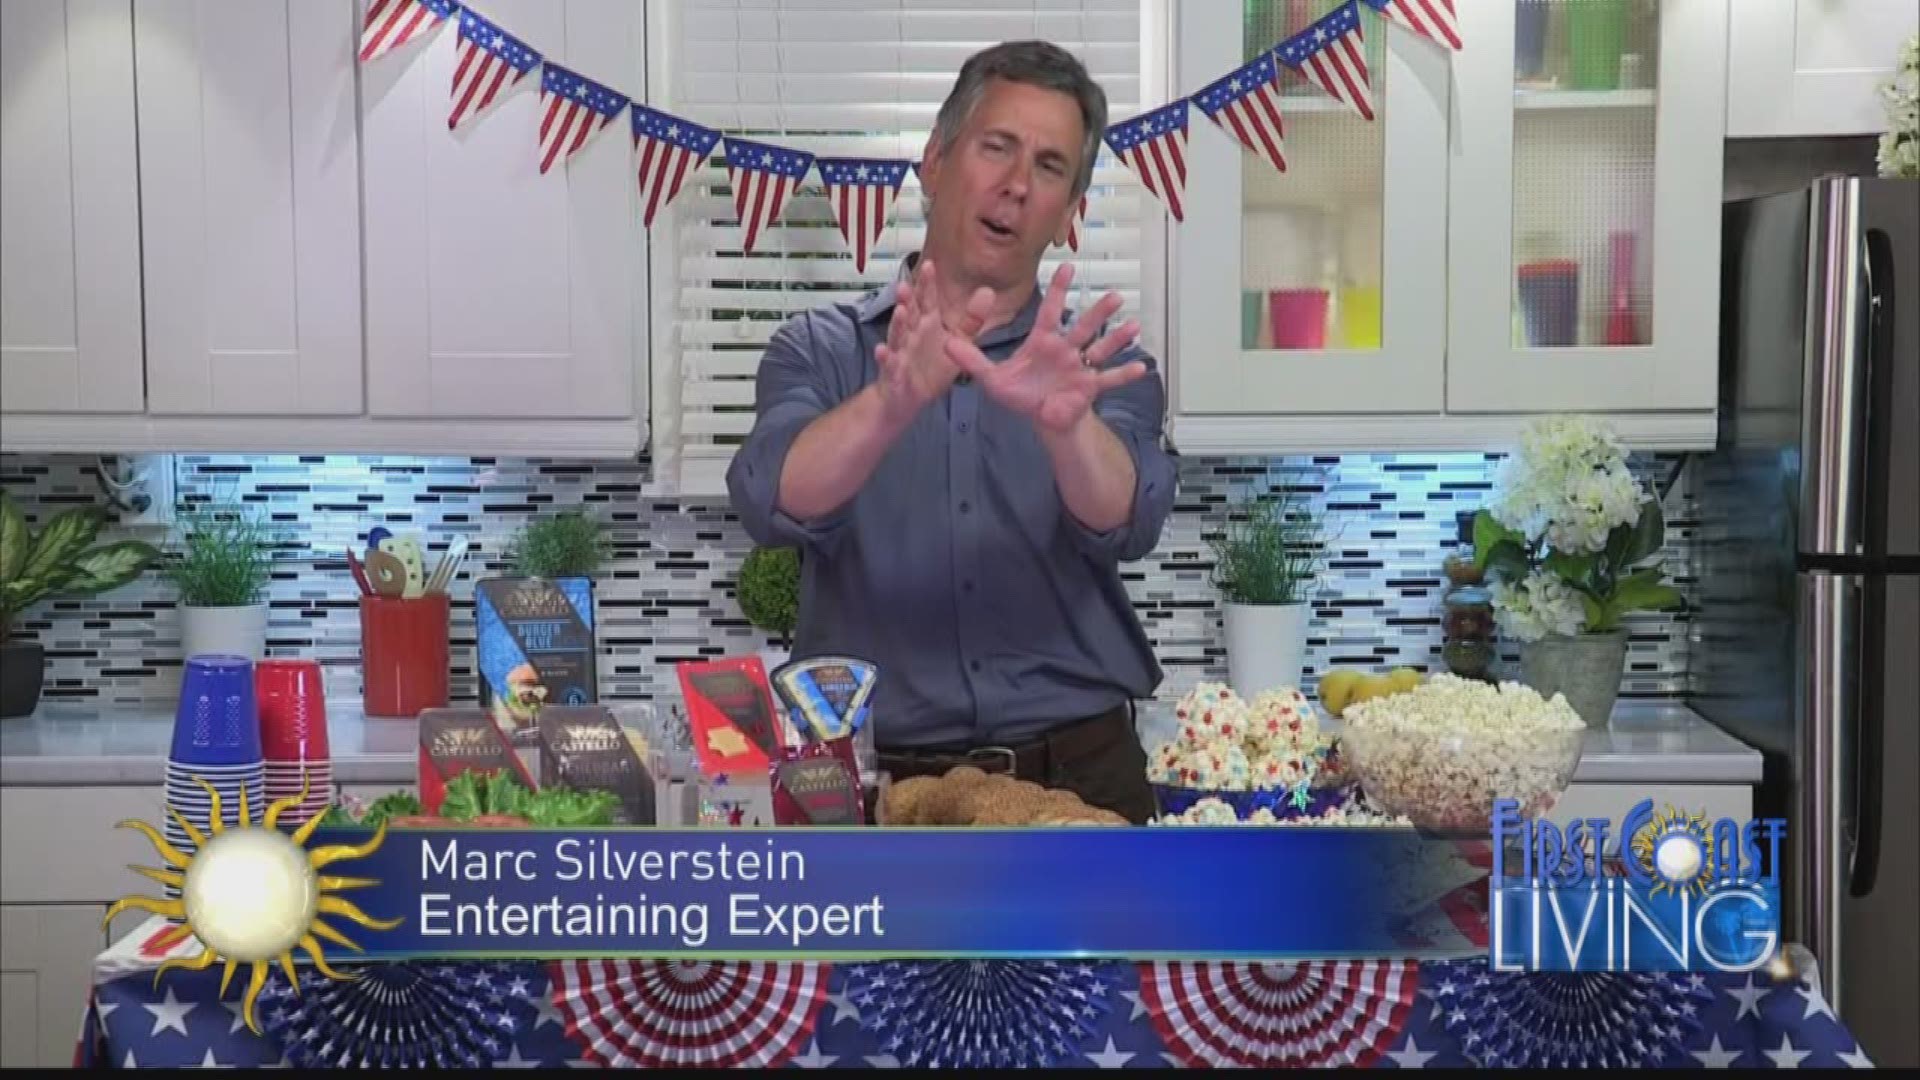 Marc Silverstein has Party Advice for the Best Fourth of July Bash